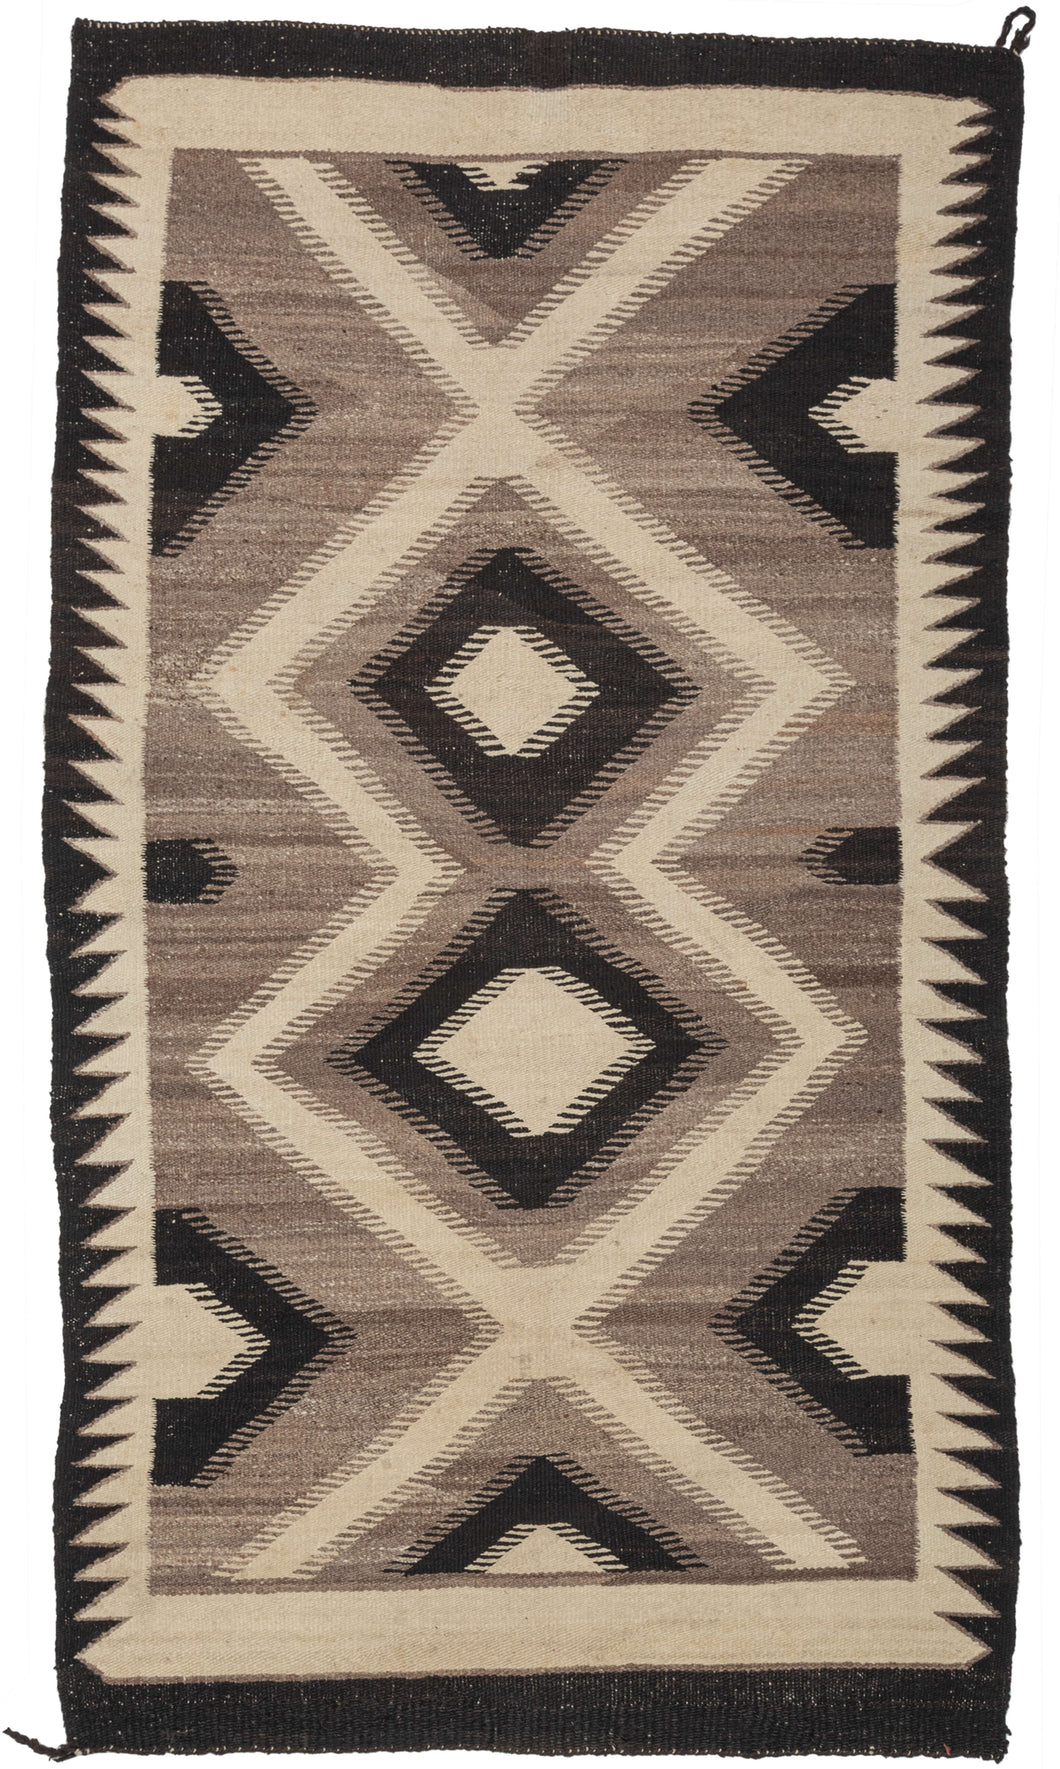 This Antique Navajo Rug features features a series of concentric diamonds in dark brown and ivory on a mottled gray background. The grey background was achieved by spinning different colors of undyed wool together. In each area where the color changes are serrated edges which give the whole composition a blurred eye-dazzling effect. Simple brown and ivory sawtooth borders frame the simple and elegant jagged diamond motif.